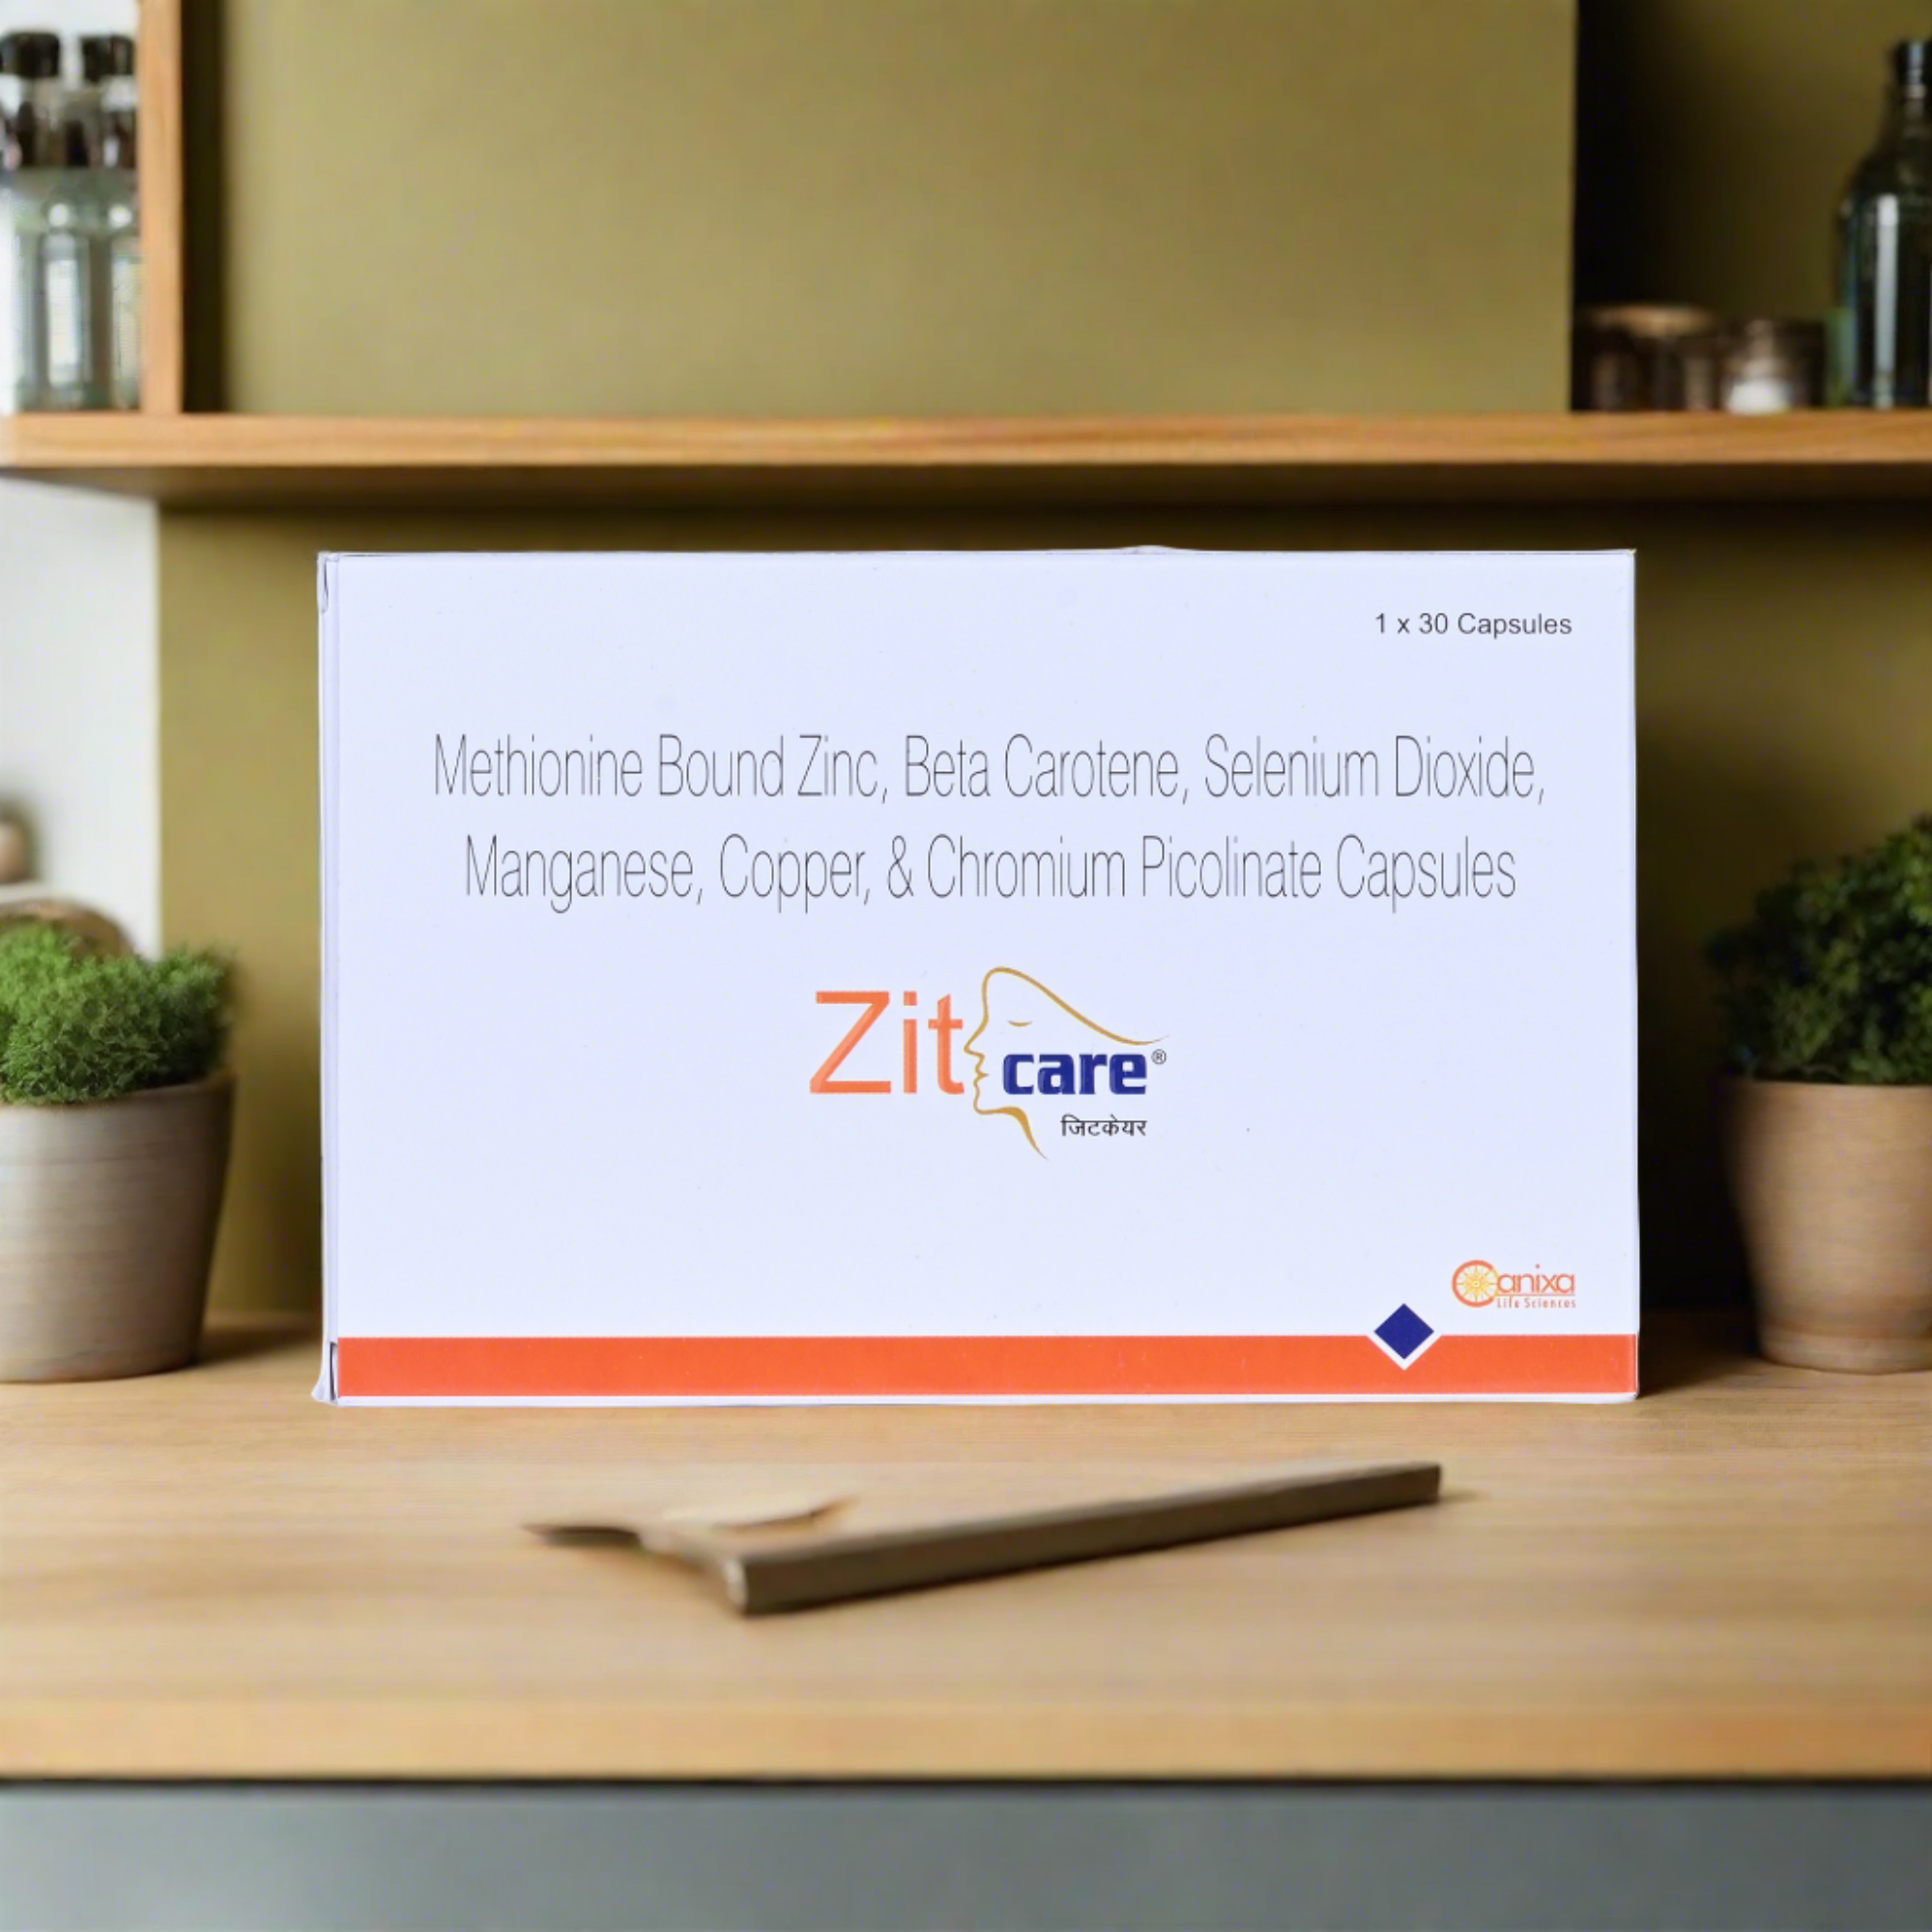 Zit care tablets